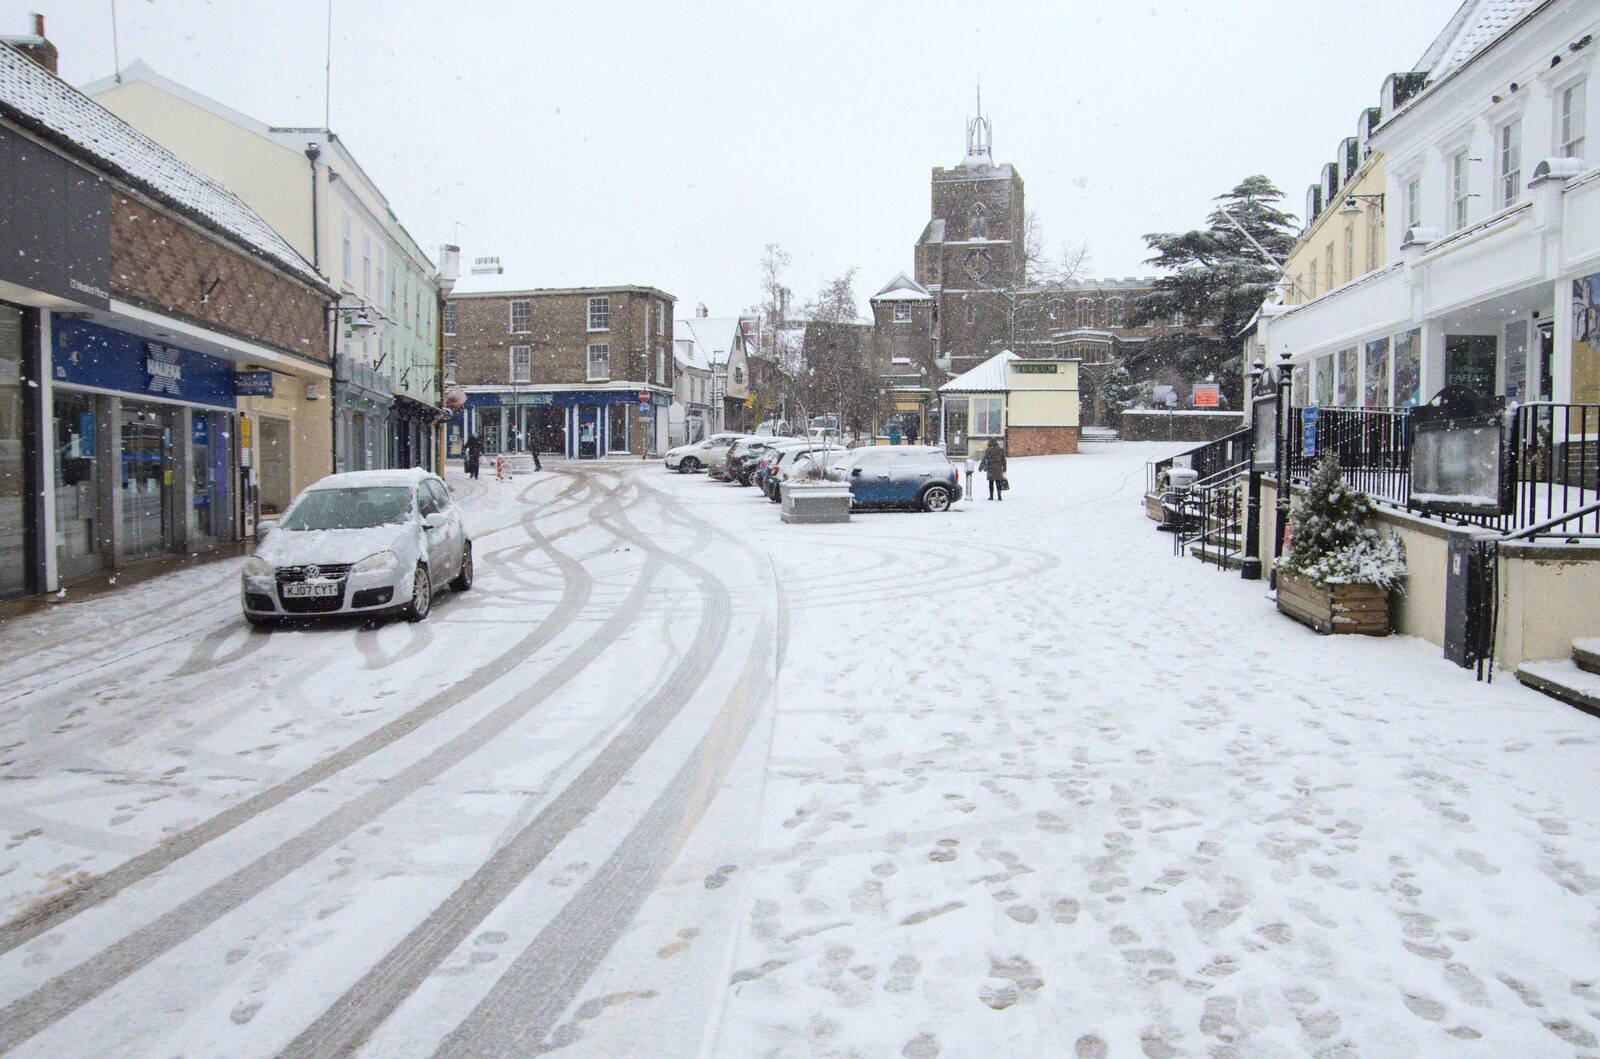 Footprints on the market place from A Snowy Morning, Diss, Norfolk - 16th January 2021